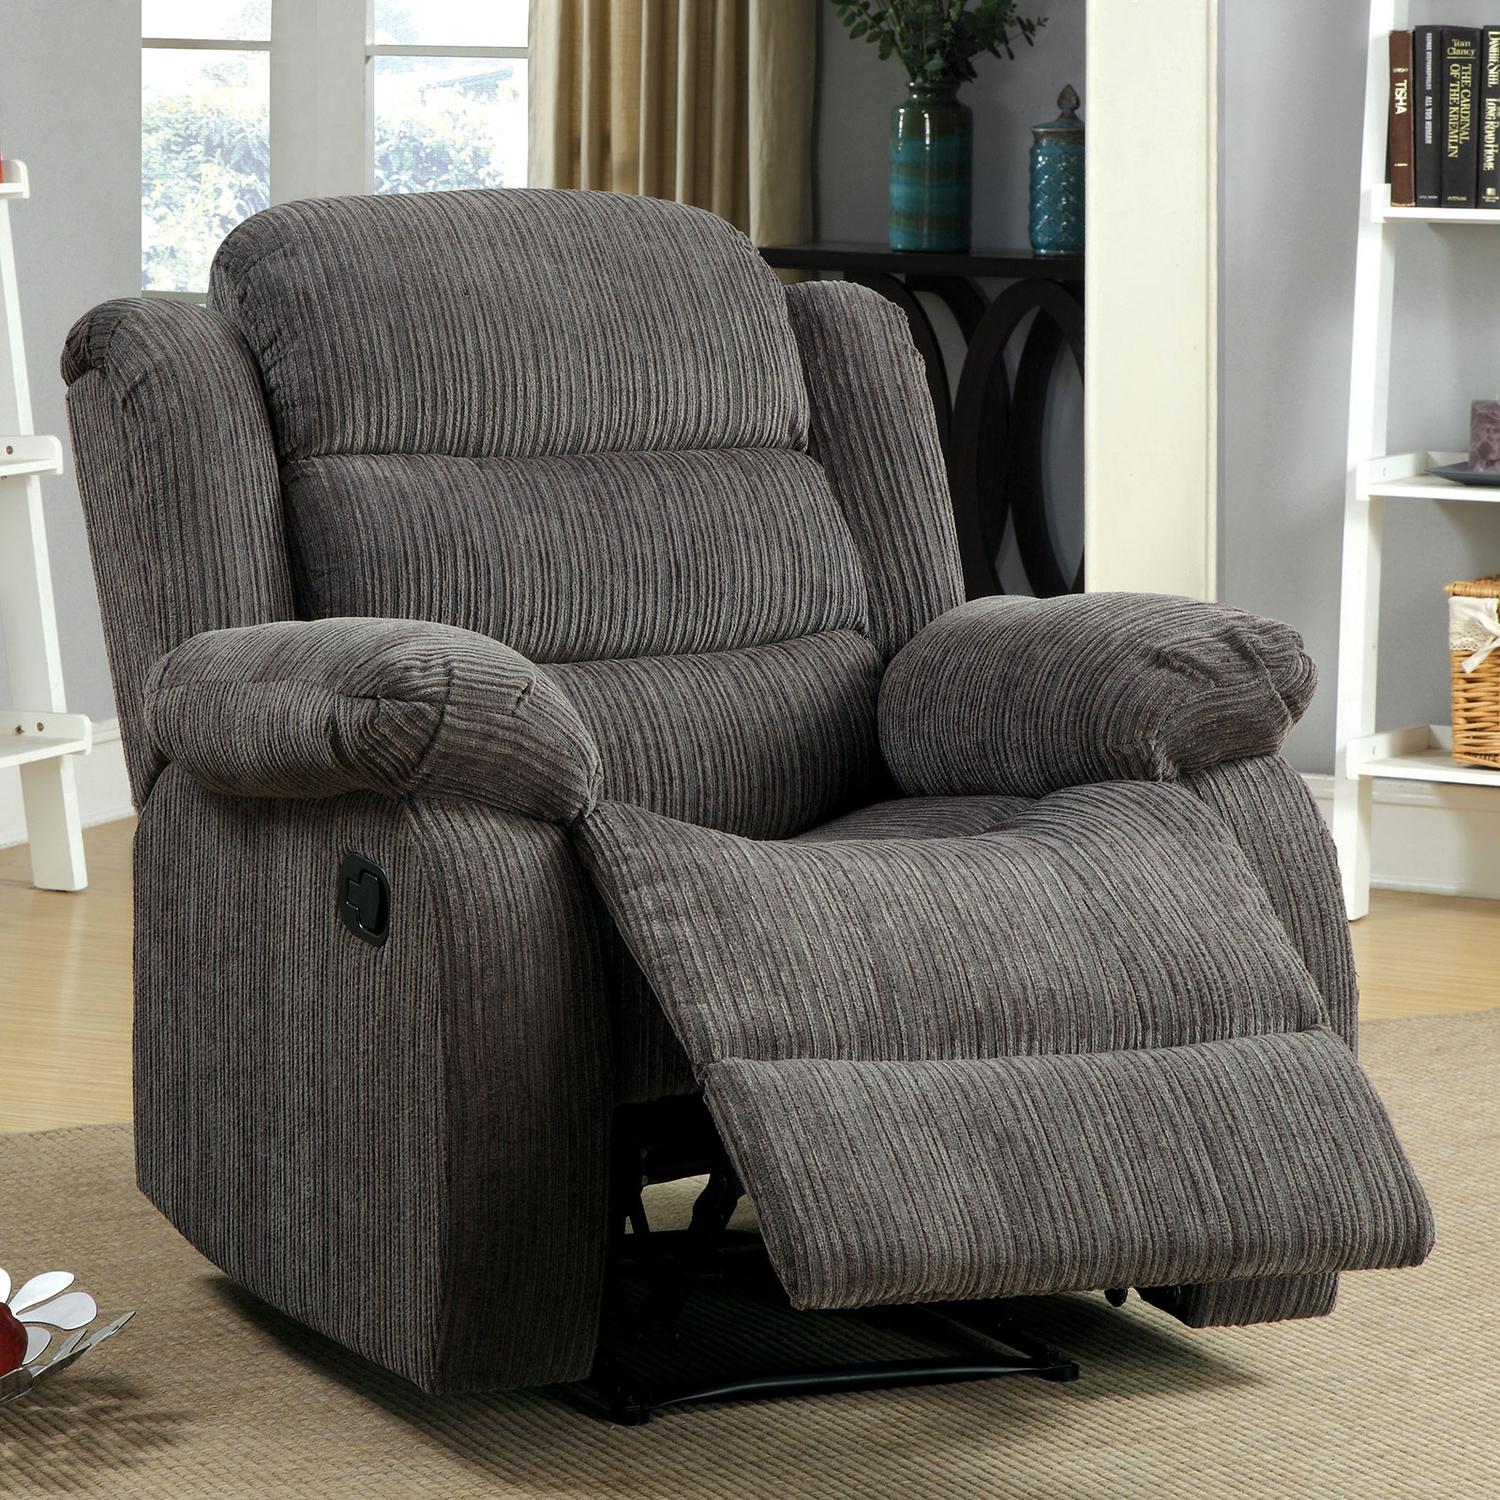 Transitional Recliner CM6173GY-CH Millville CM6173GY-CH in Gray Chenille